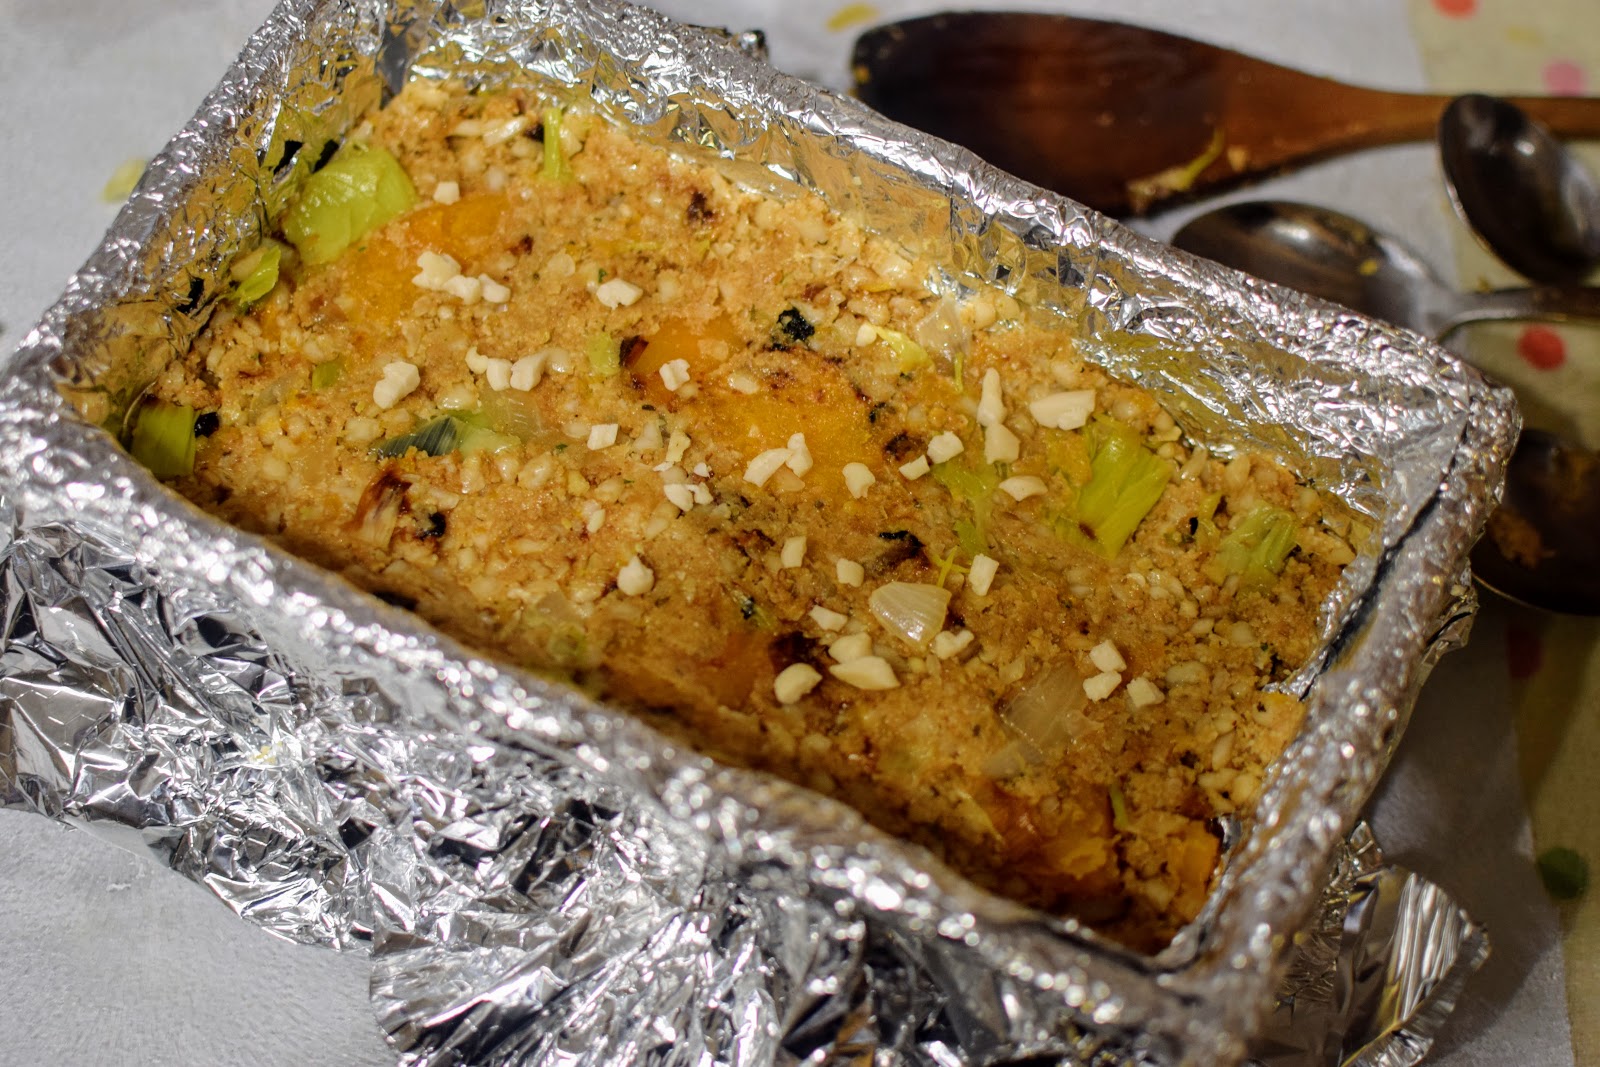 , Food:  Butternut Squash and Leek Nut Roast (Eating Root to Leaf: How to Use Every Part of the Vegetable)